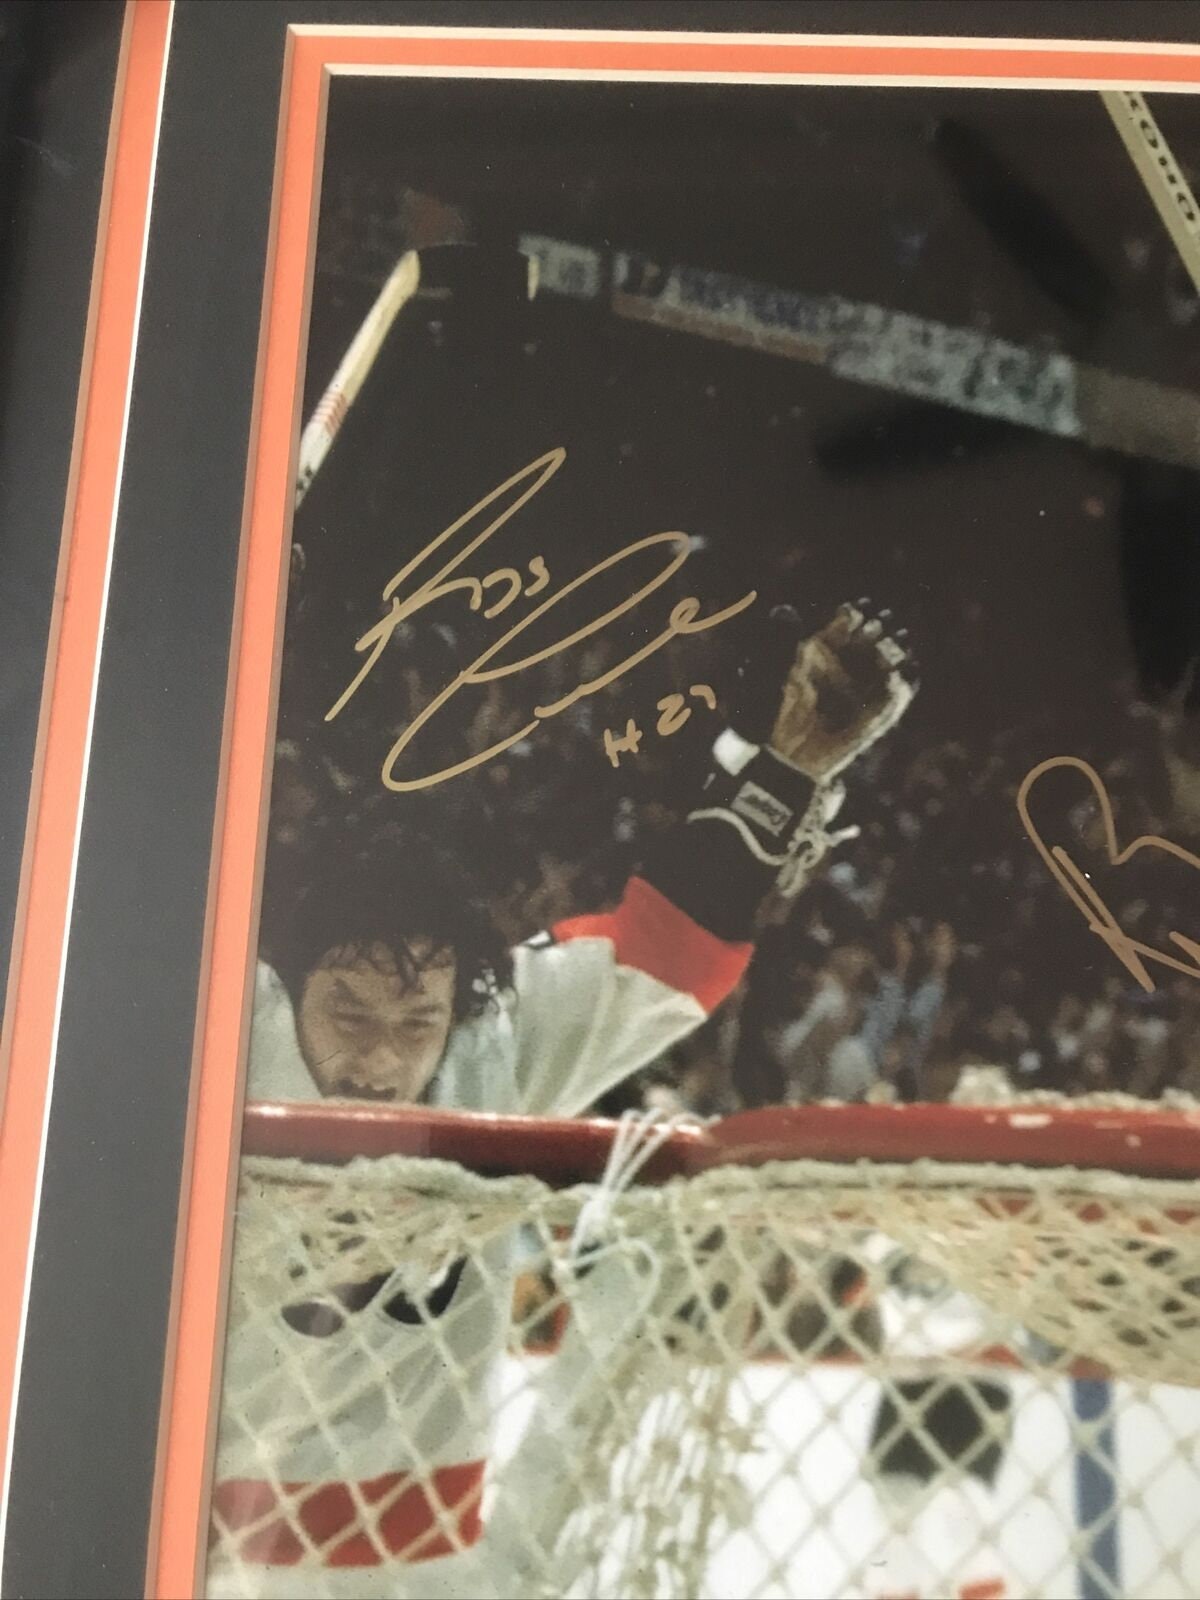 Reggie Leach Philadelphia Flyers Stanley Cup Autographed NHL Hockey 8 x  10 Framed and Matted Photo